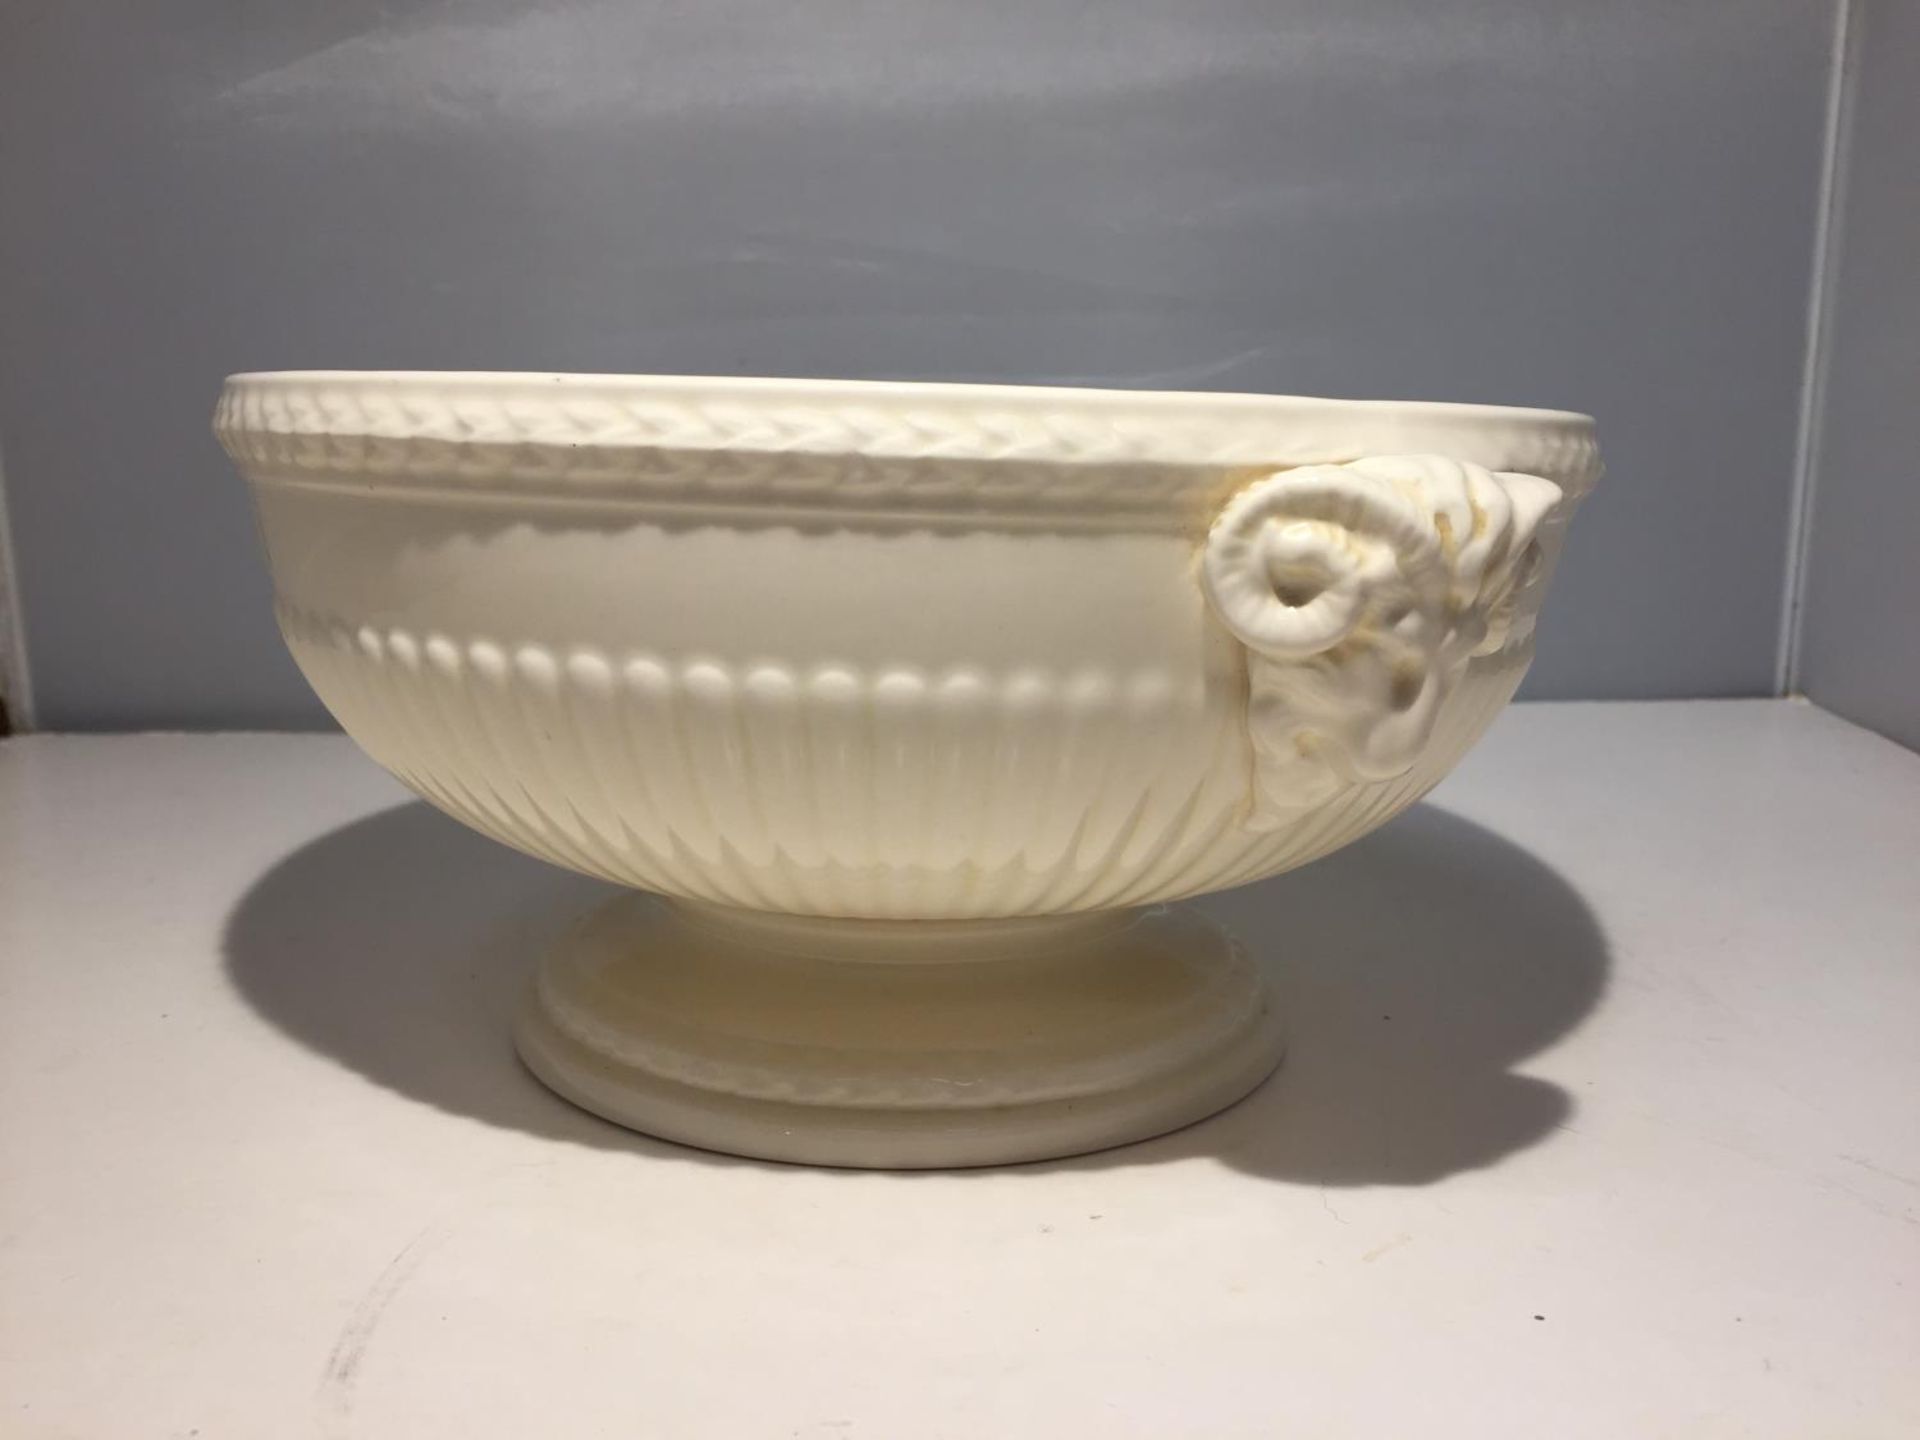 A WEDGEWOOD QUEENSWARE BOWL - Image 2 of 4